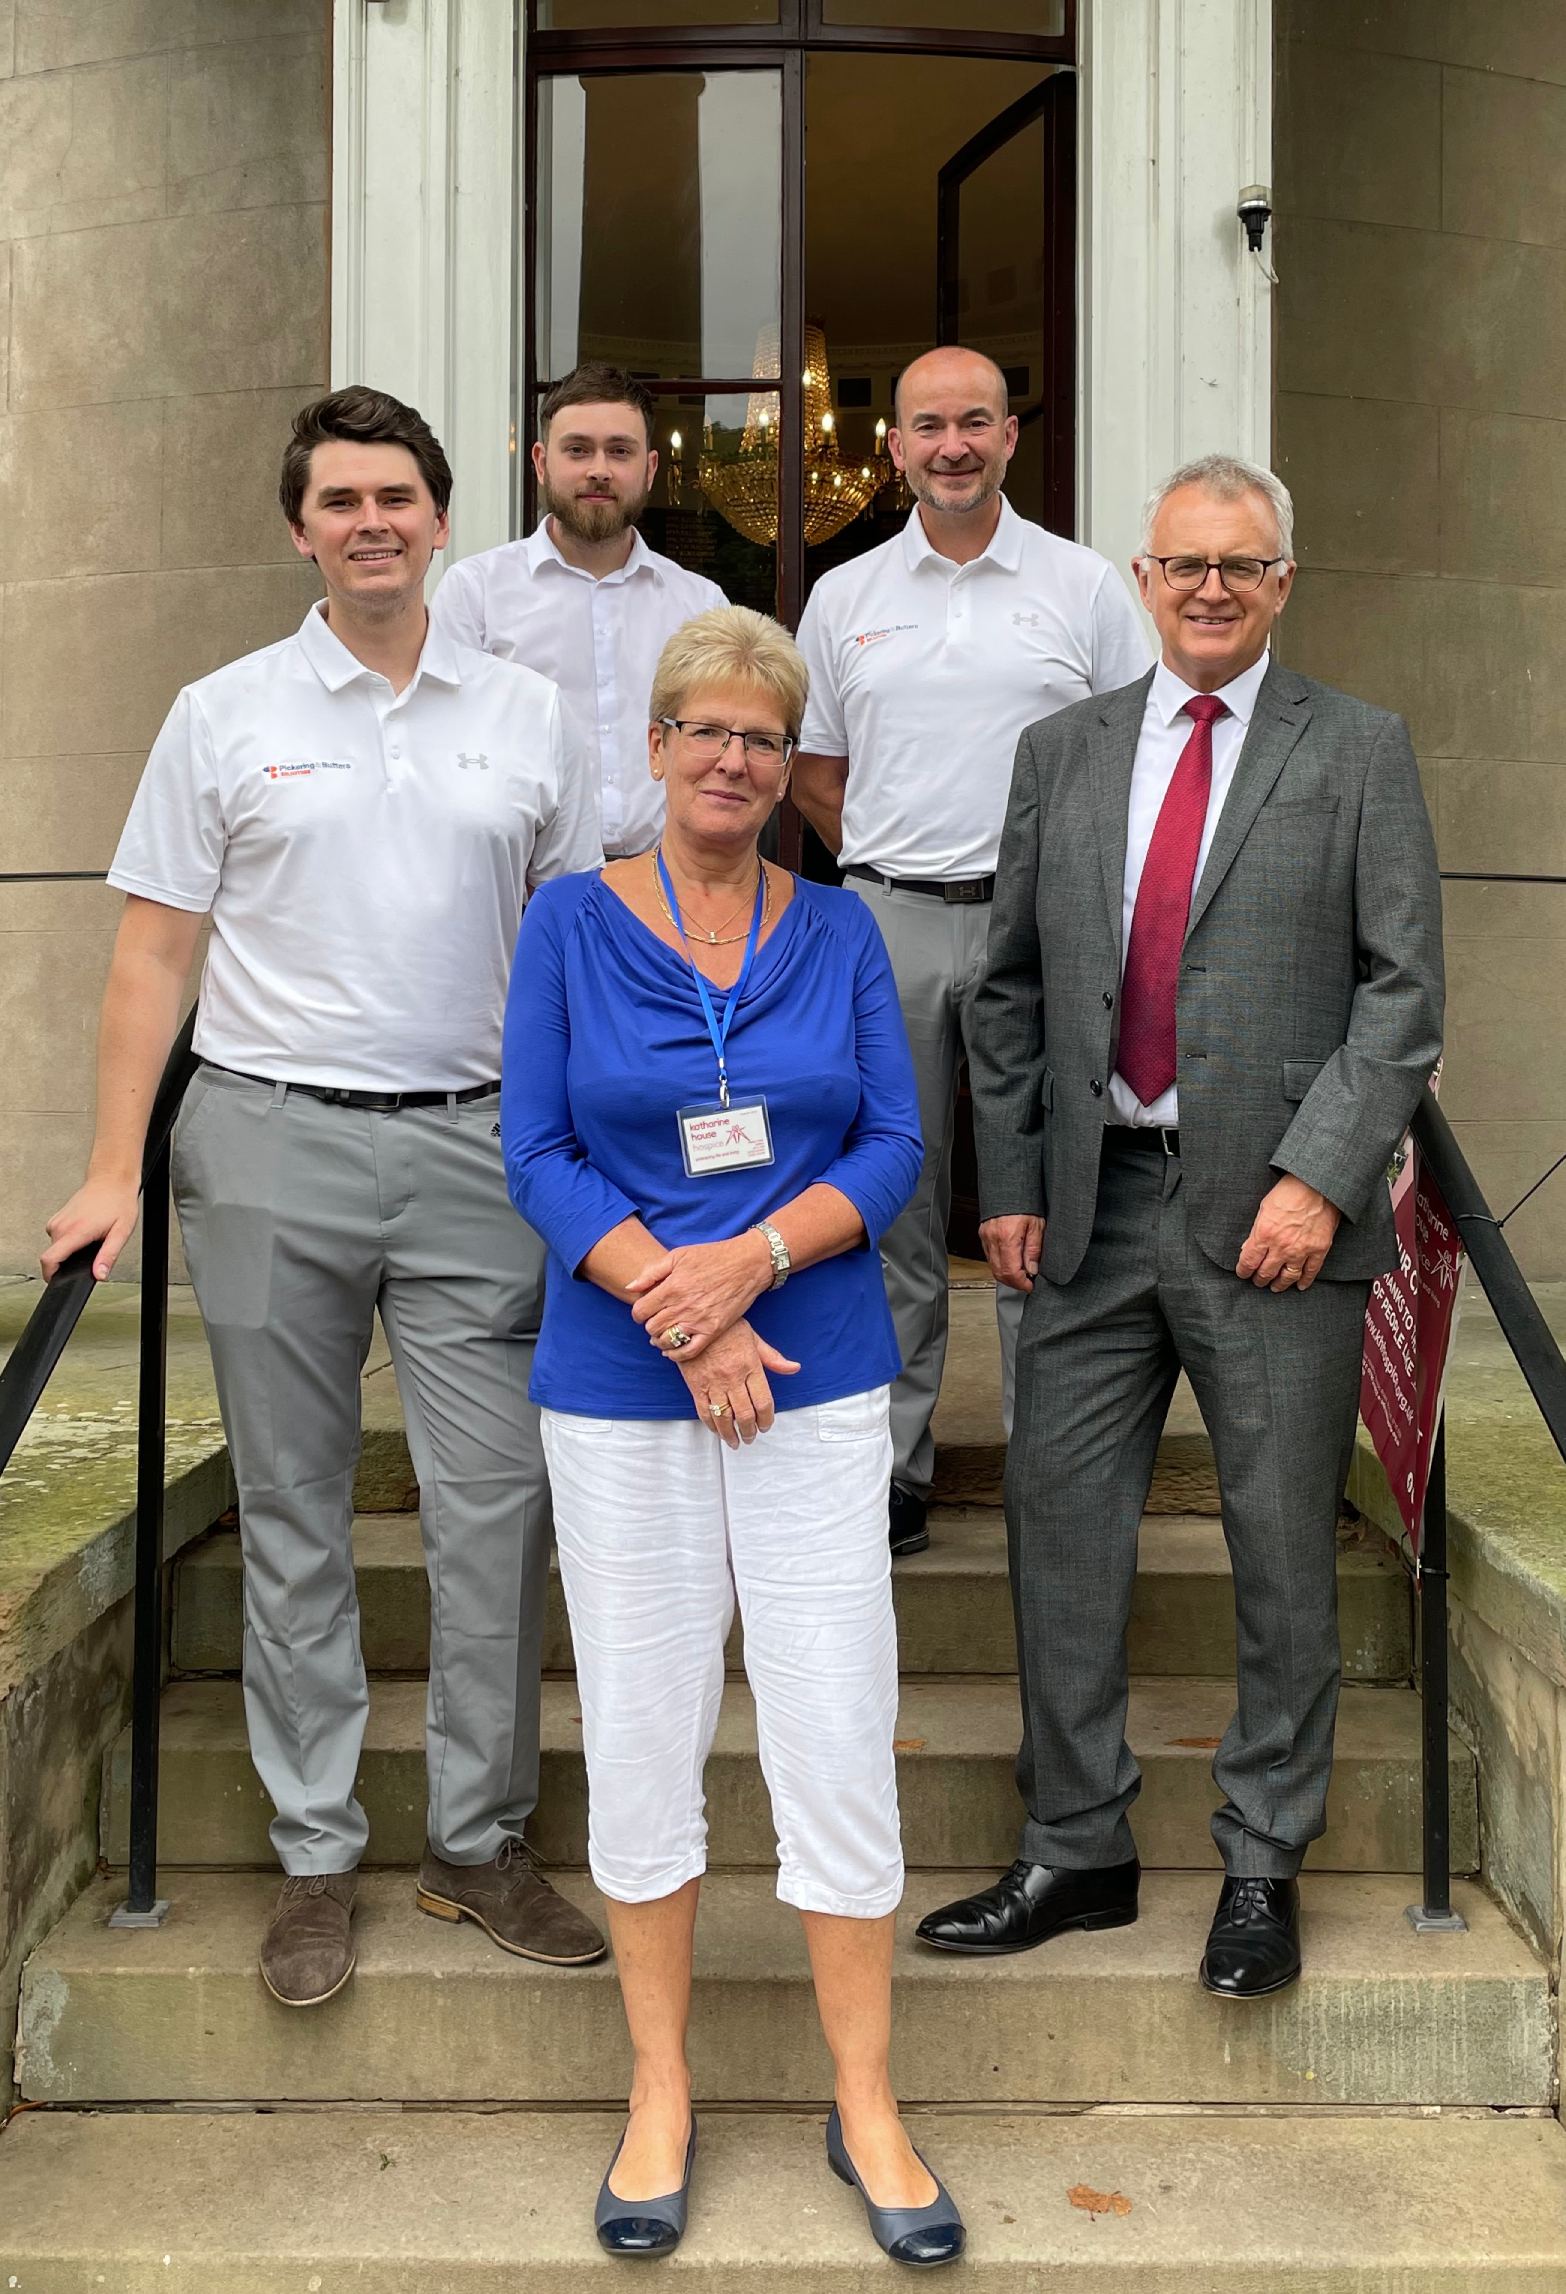 Stephanie Harris, Katharine House Hospice Vice-chairman of Trustees, standing with four male representatives of Picking and Butters Solicitors, Stafford.